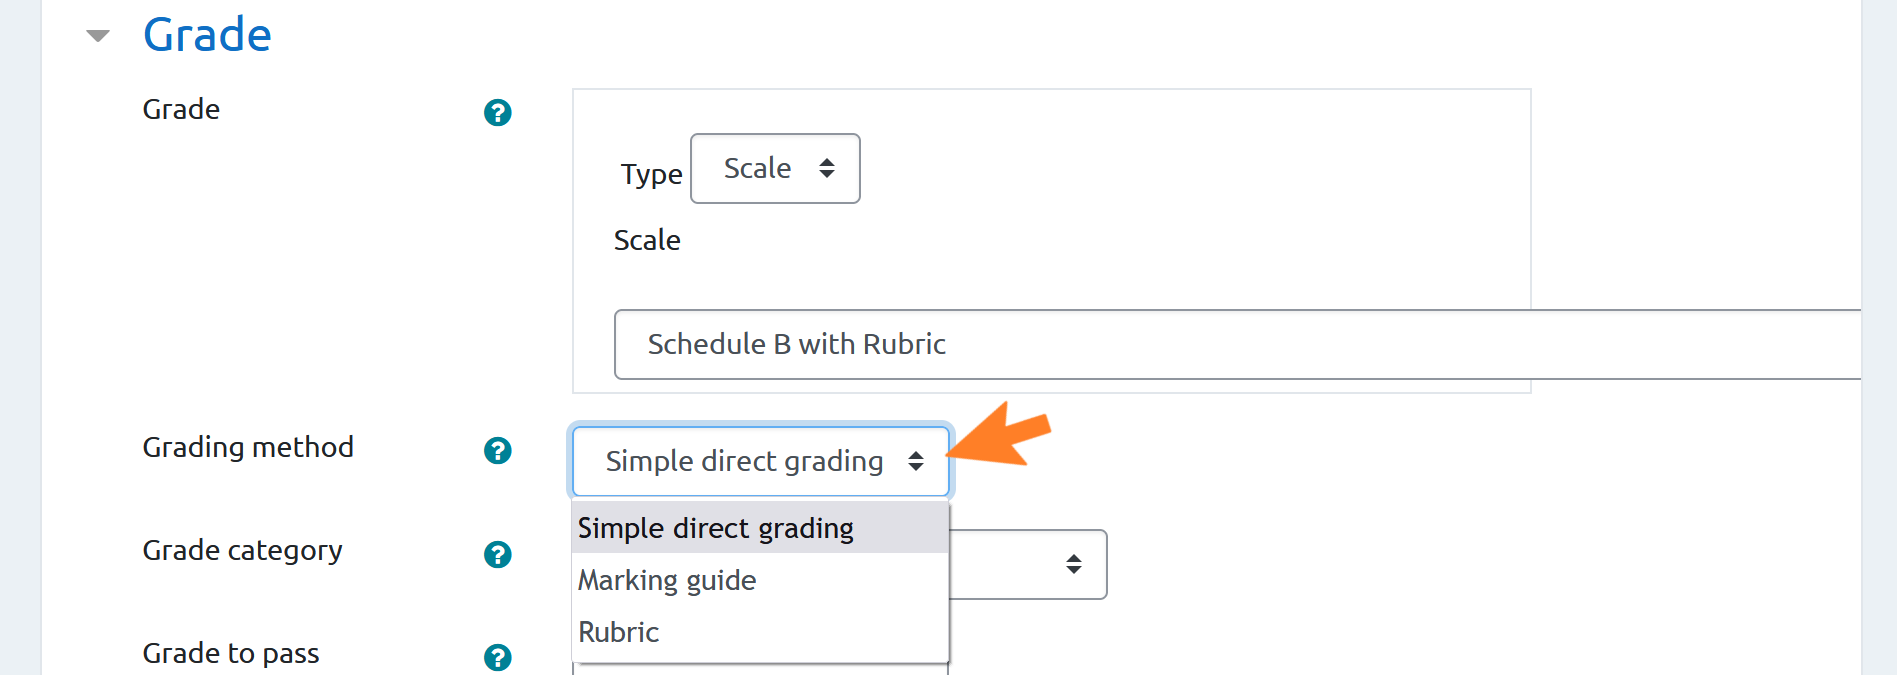 Image of the Grade sub-menu in Moodle assessment settings. 